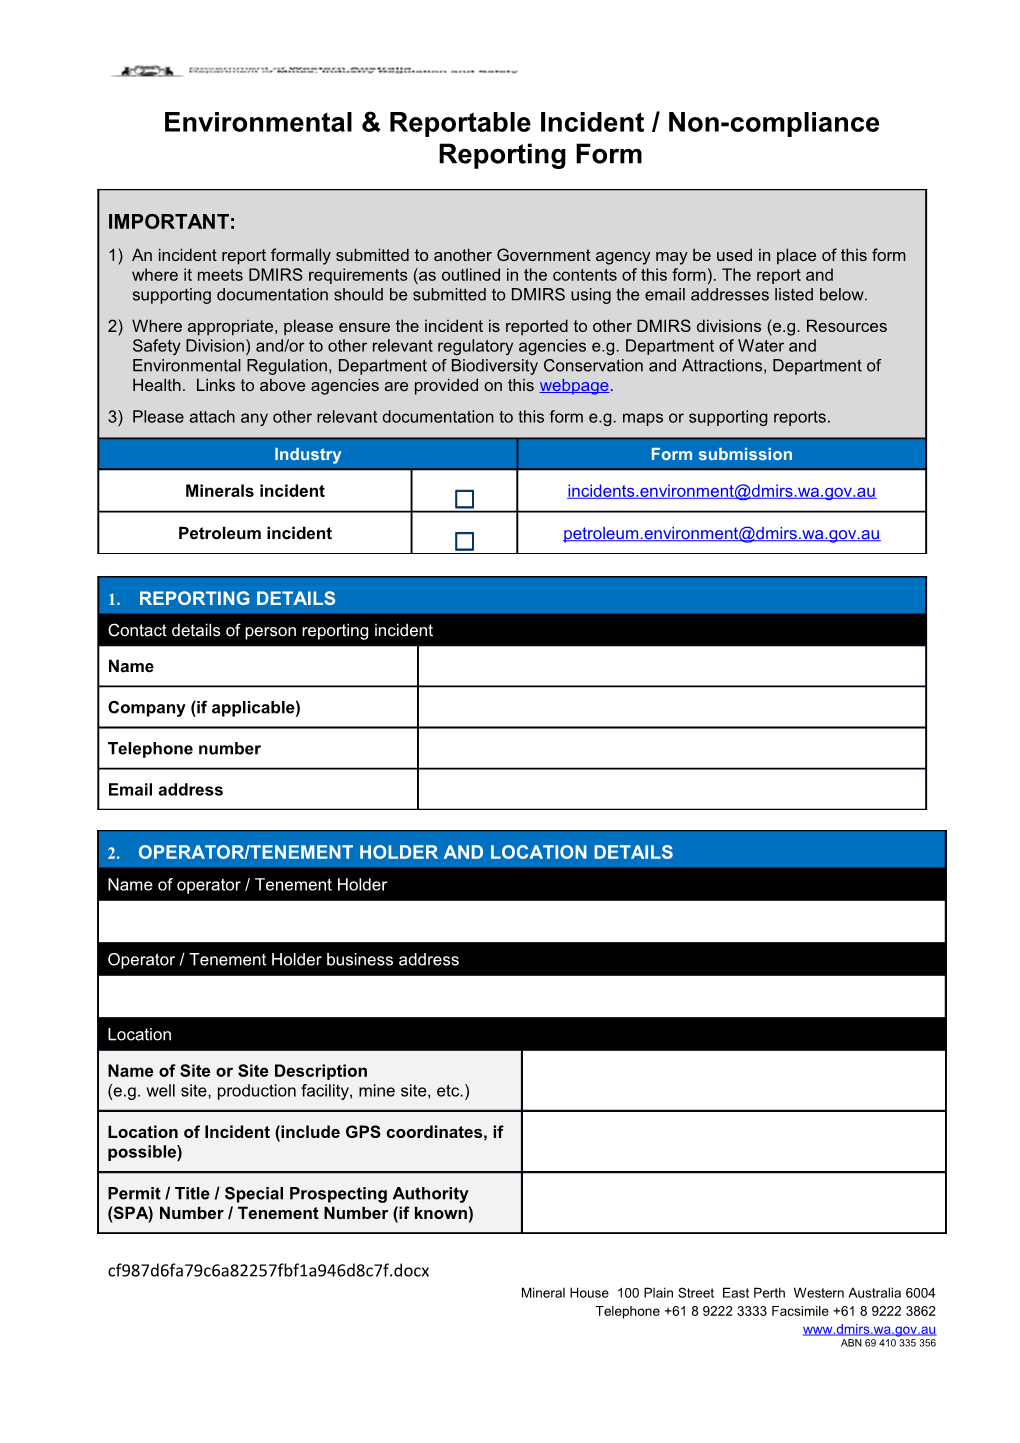 Environmental & Reportable Incident/Non-Compliance Reporting Form